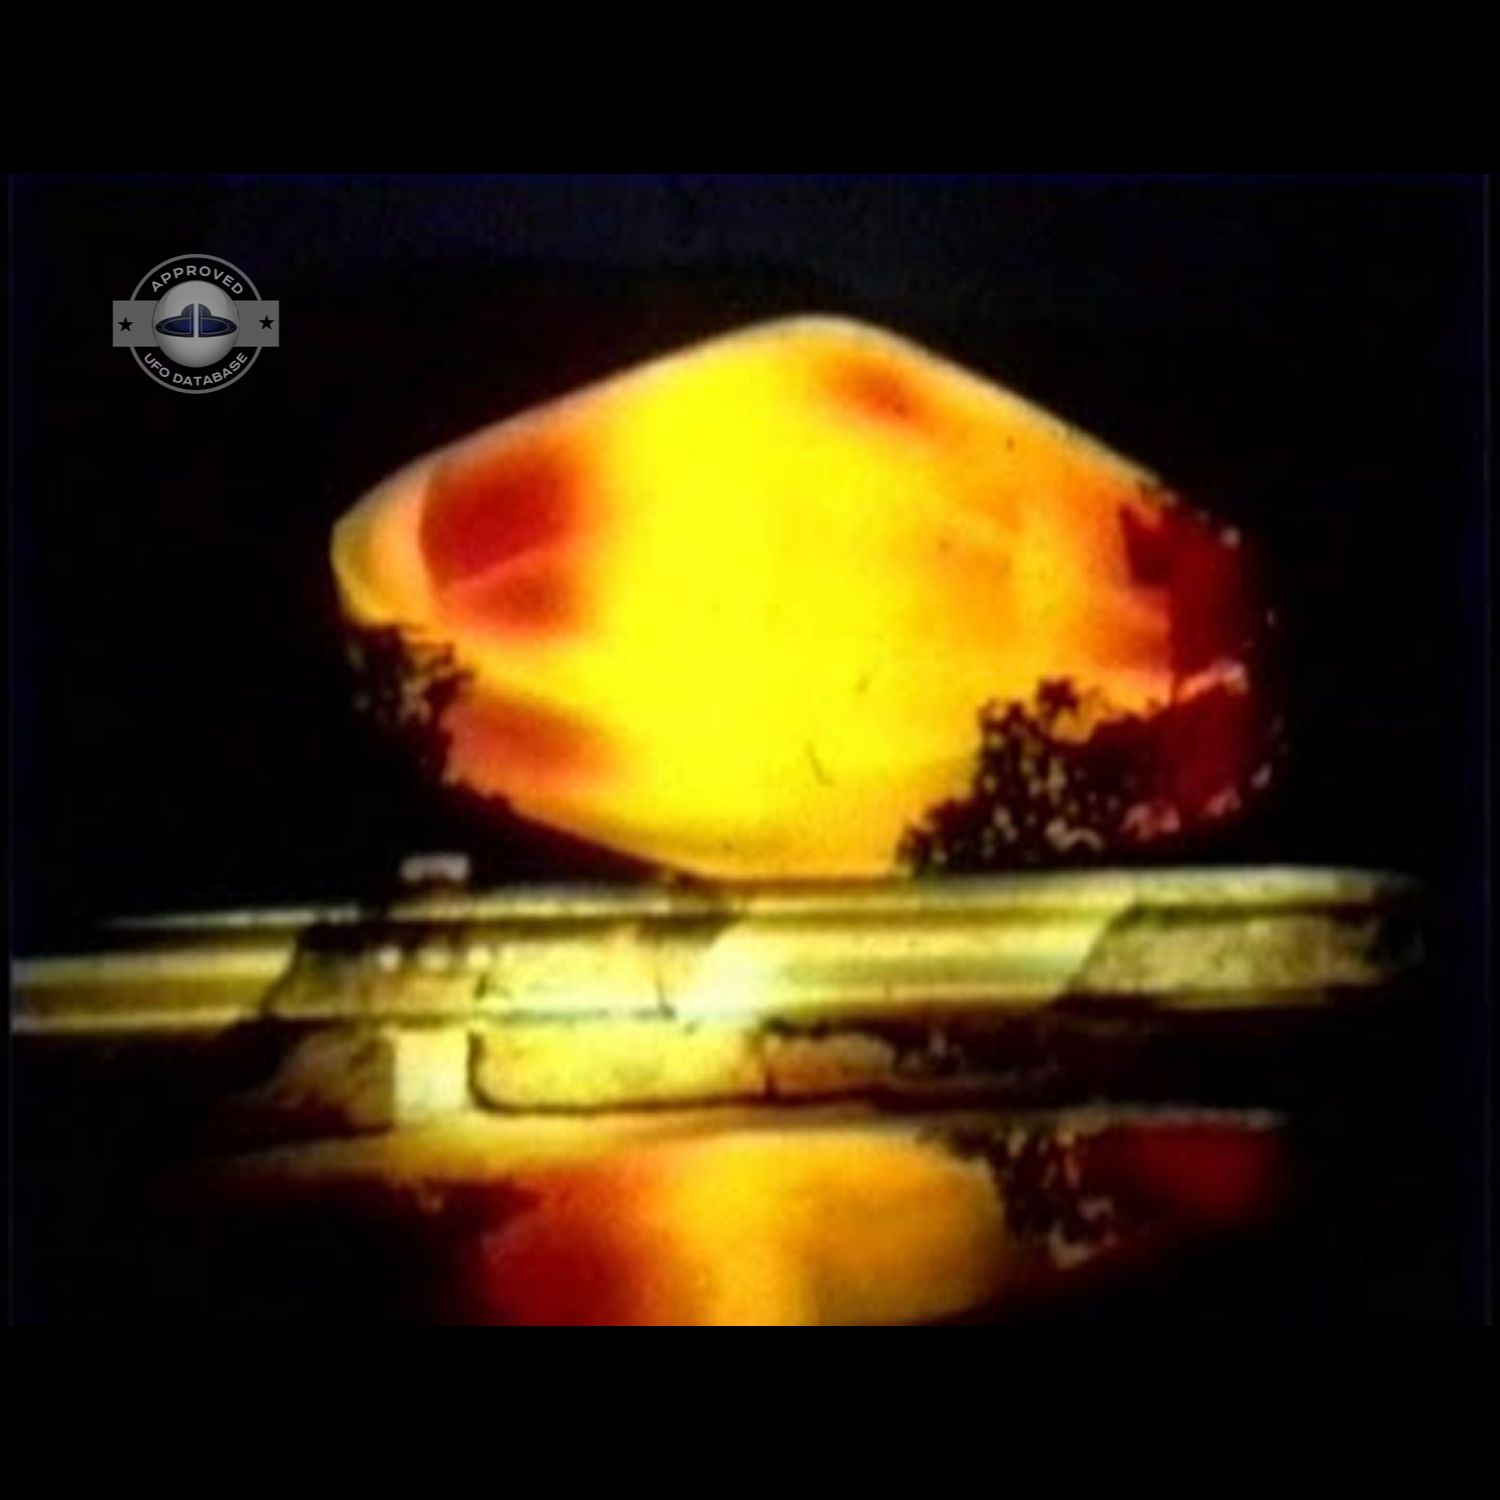 The Carlos Diaz experience is one of the most important UFO sighting UFO Picture #137-2